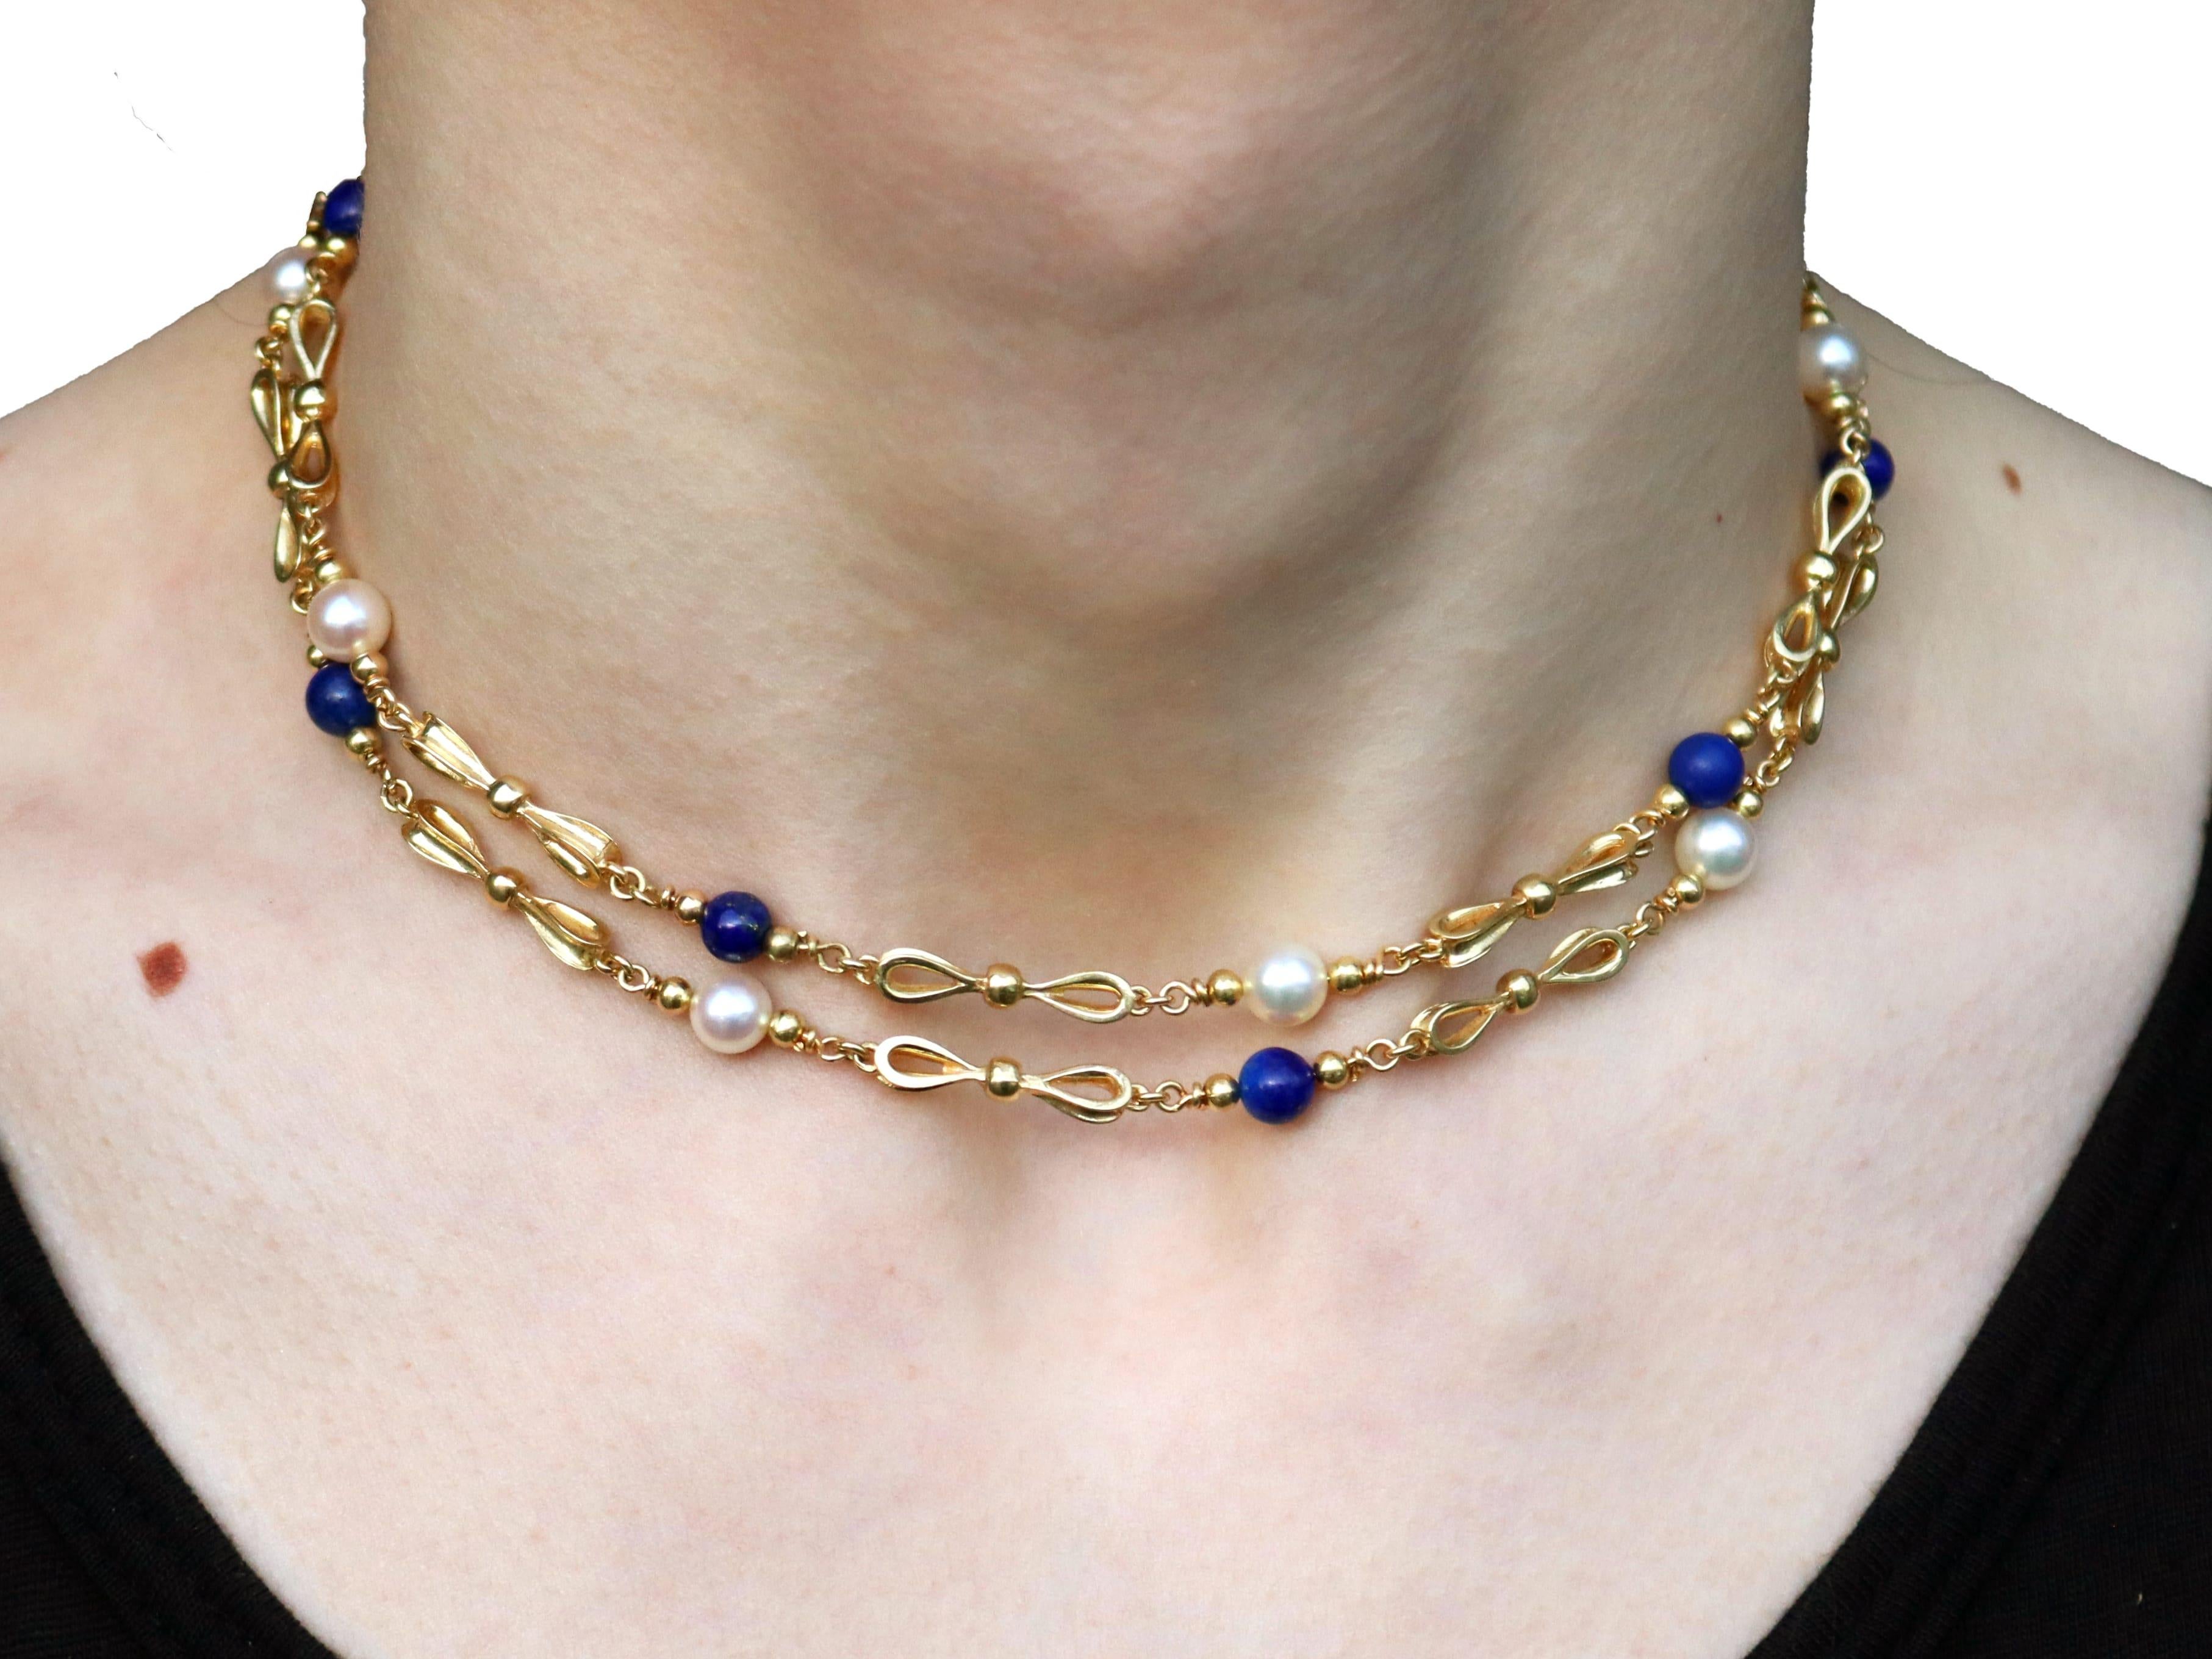 Vintage 7.80 Carat Lapis Lazuli  Pearl Chain Necklace in 18k Yellow Gold For Sale 4